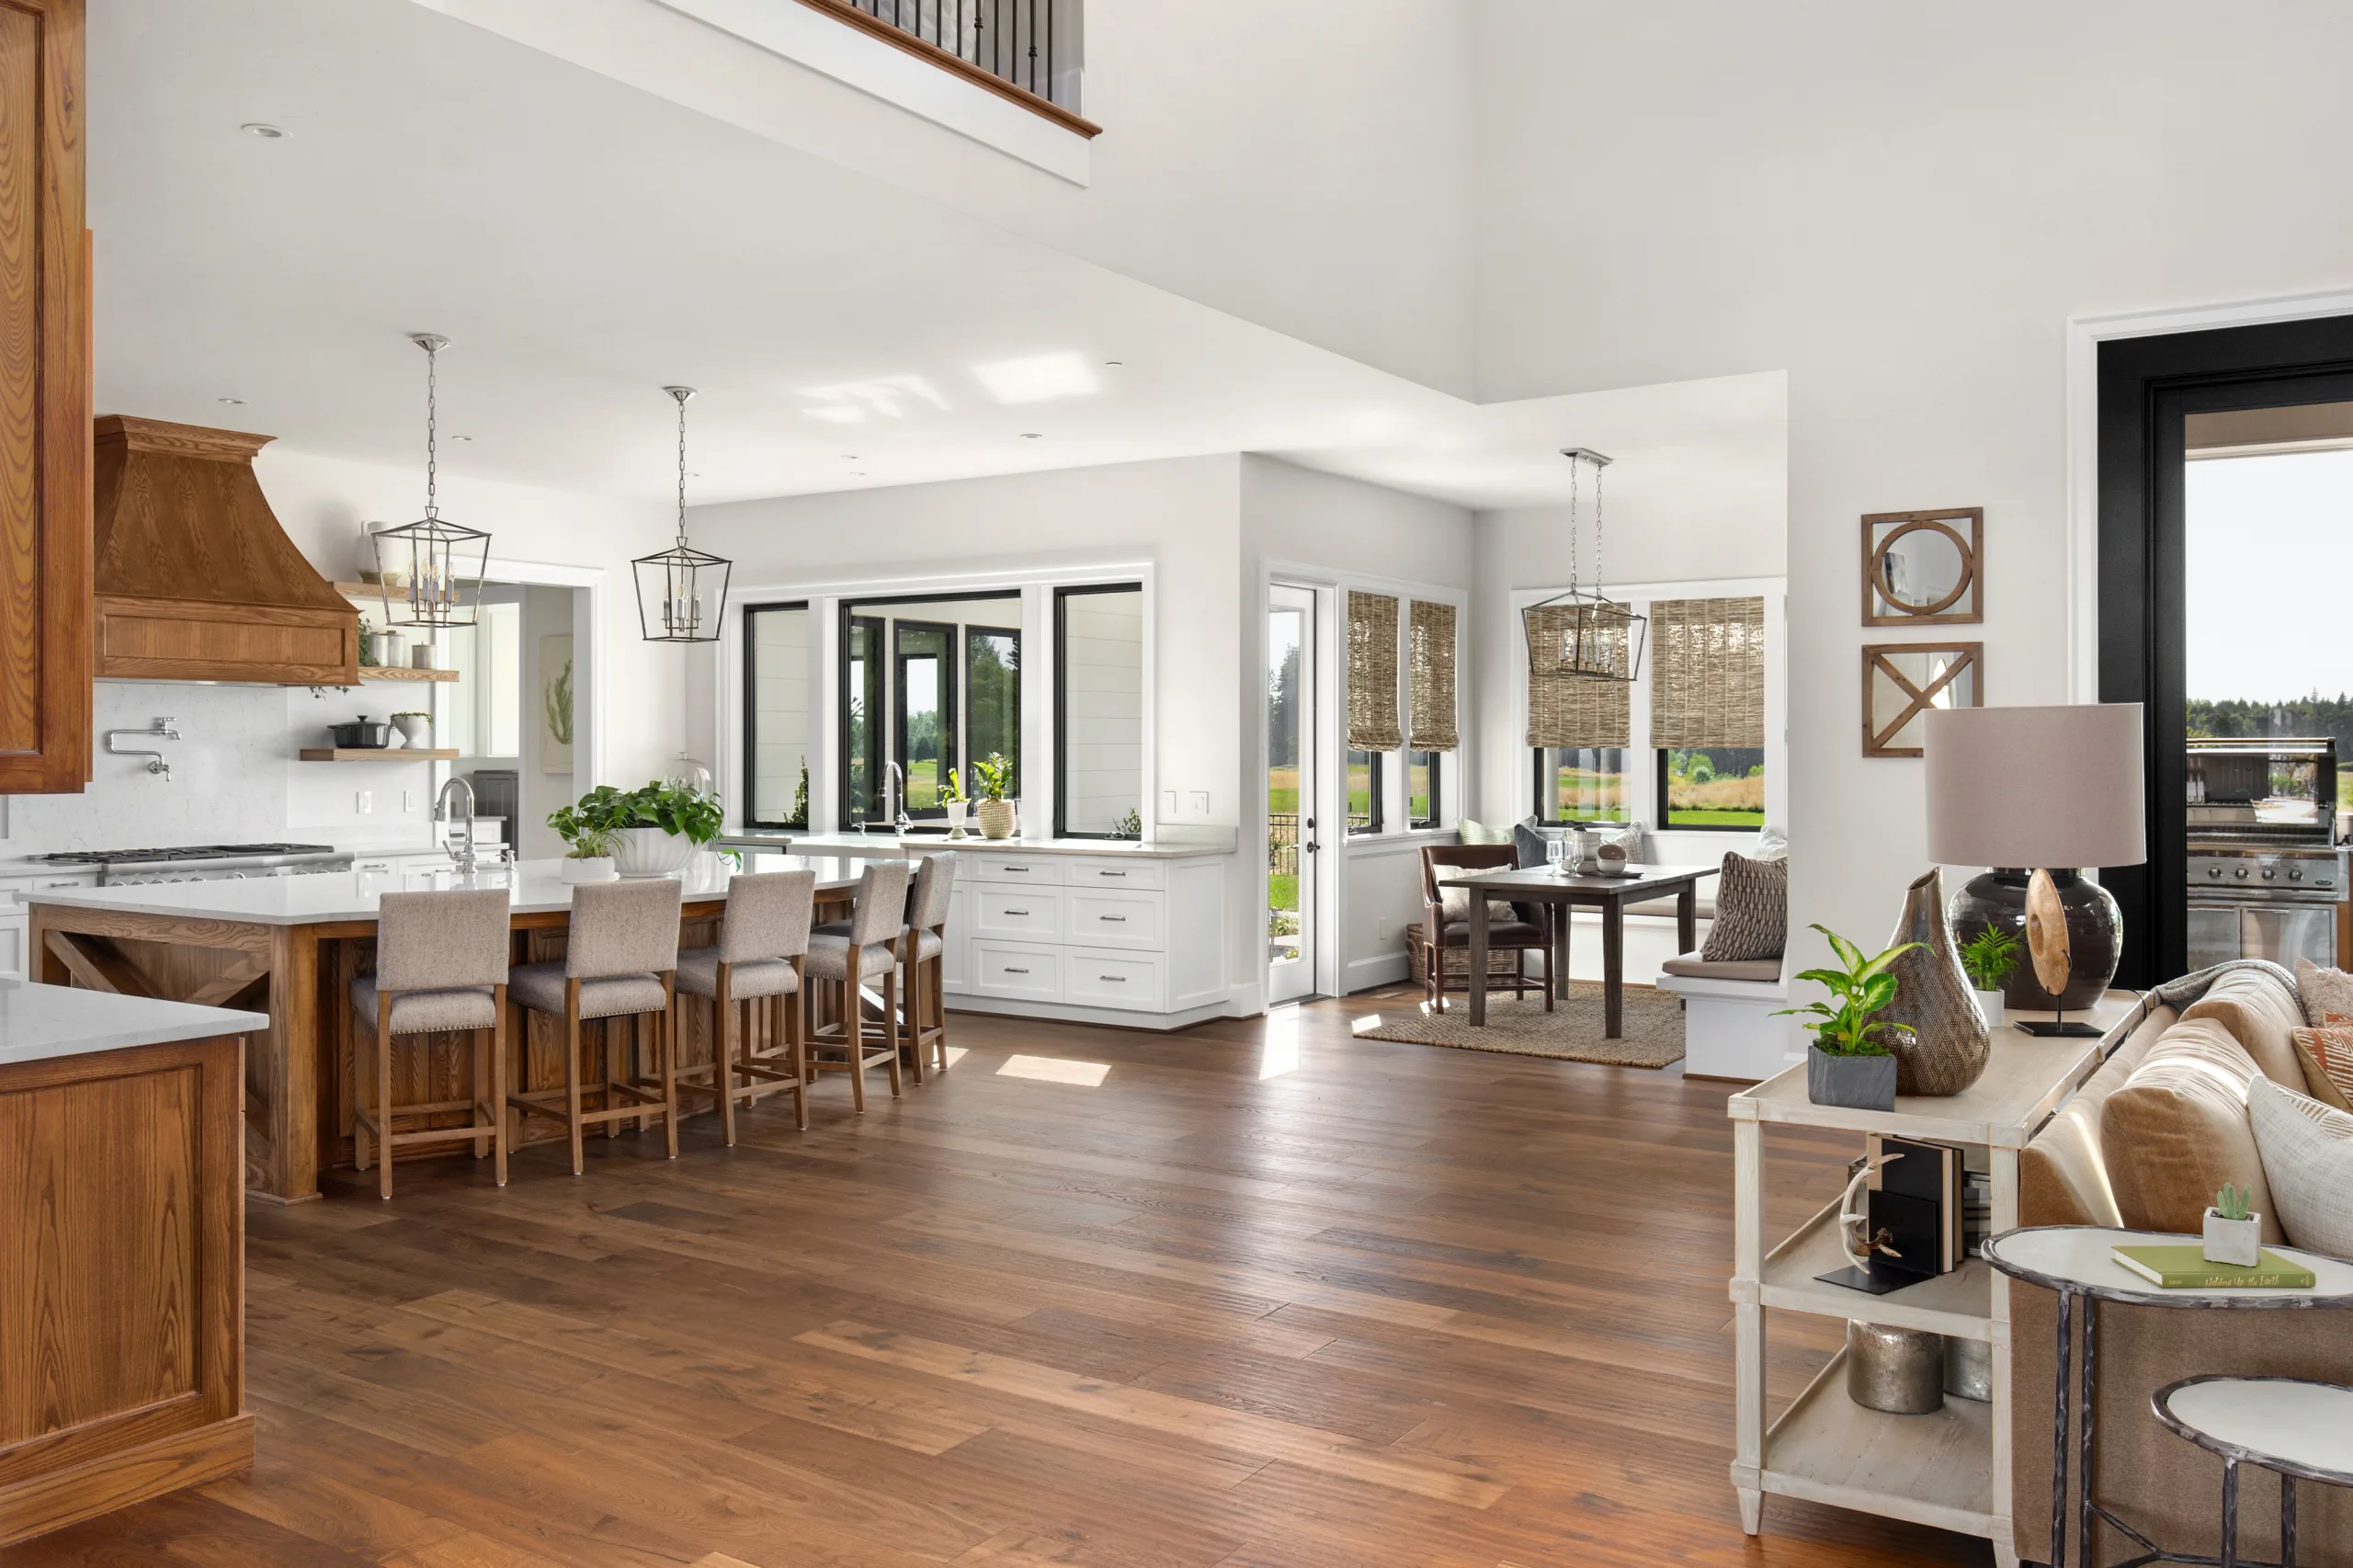 Living Room, Kitchen, and Eating Nook in New Luxury Home flooring faves A Dive into Popular Flooring Options